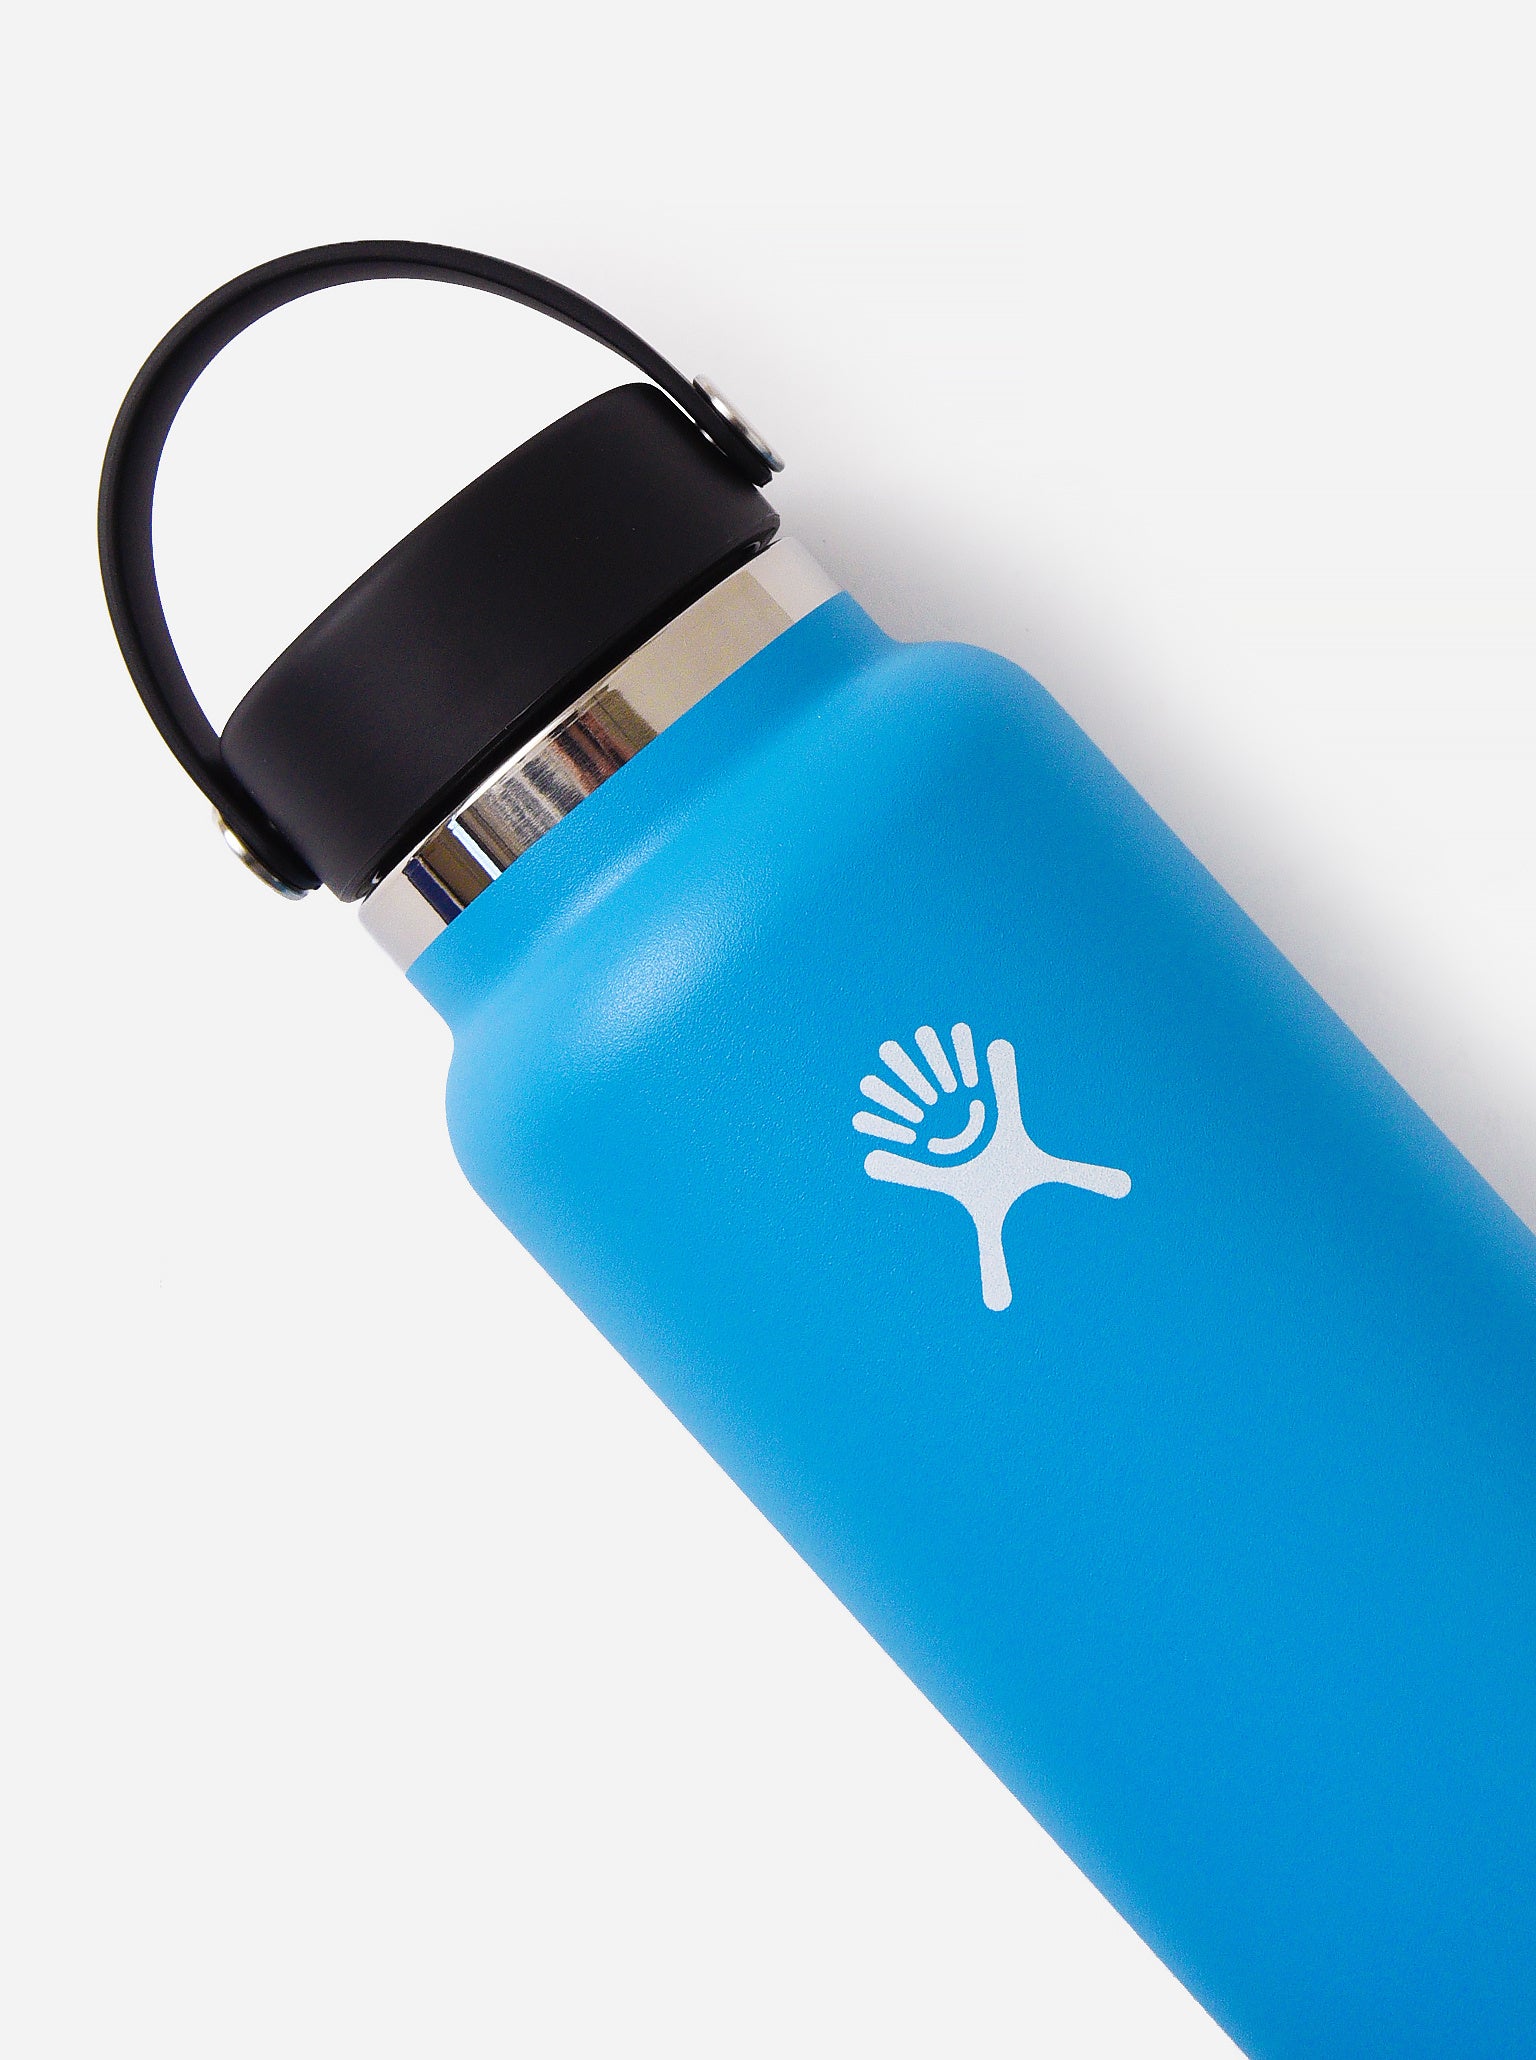 Wide-Mouth Insulated Water Bottle with Flex Cap - 32 fl. oz.